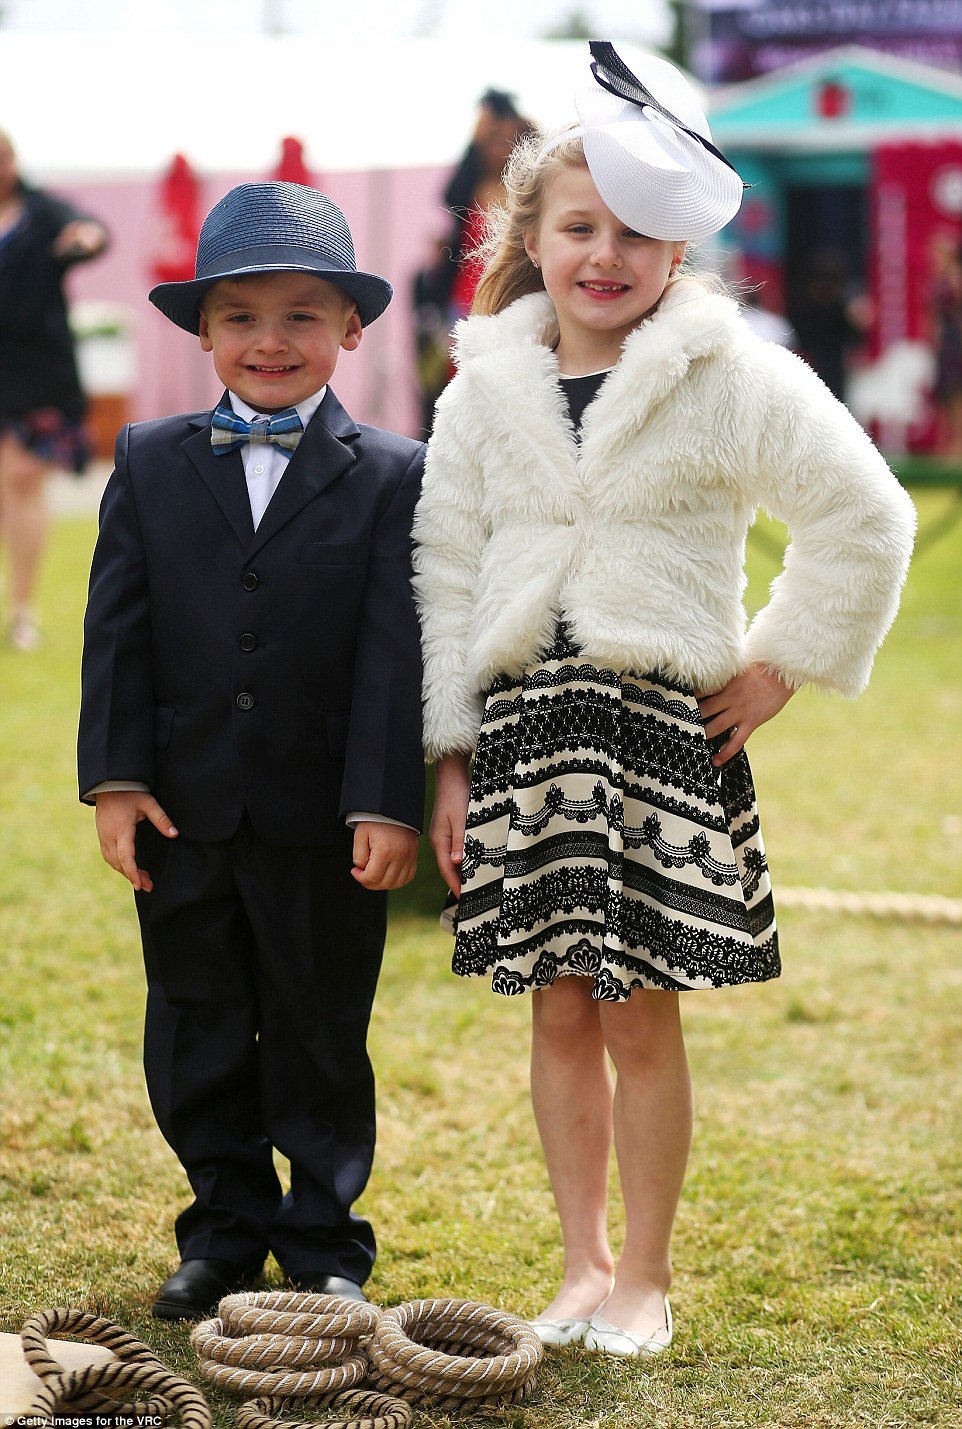 Bucking the trend and opting for black and white outfits, these two young fashionistas kept it classy as they got involved in one of the activities on offer